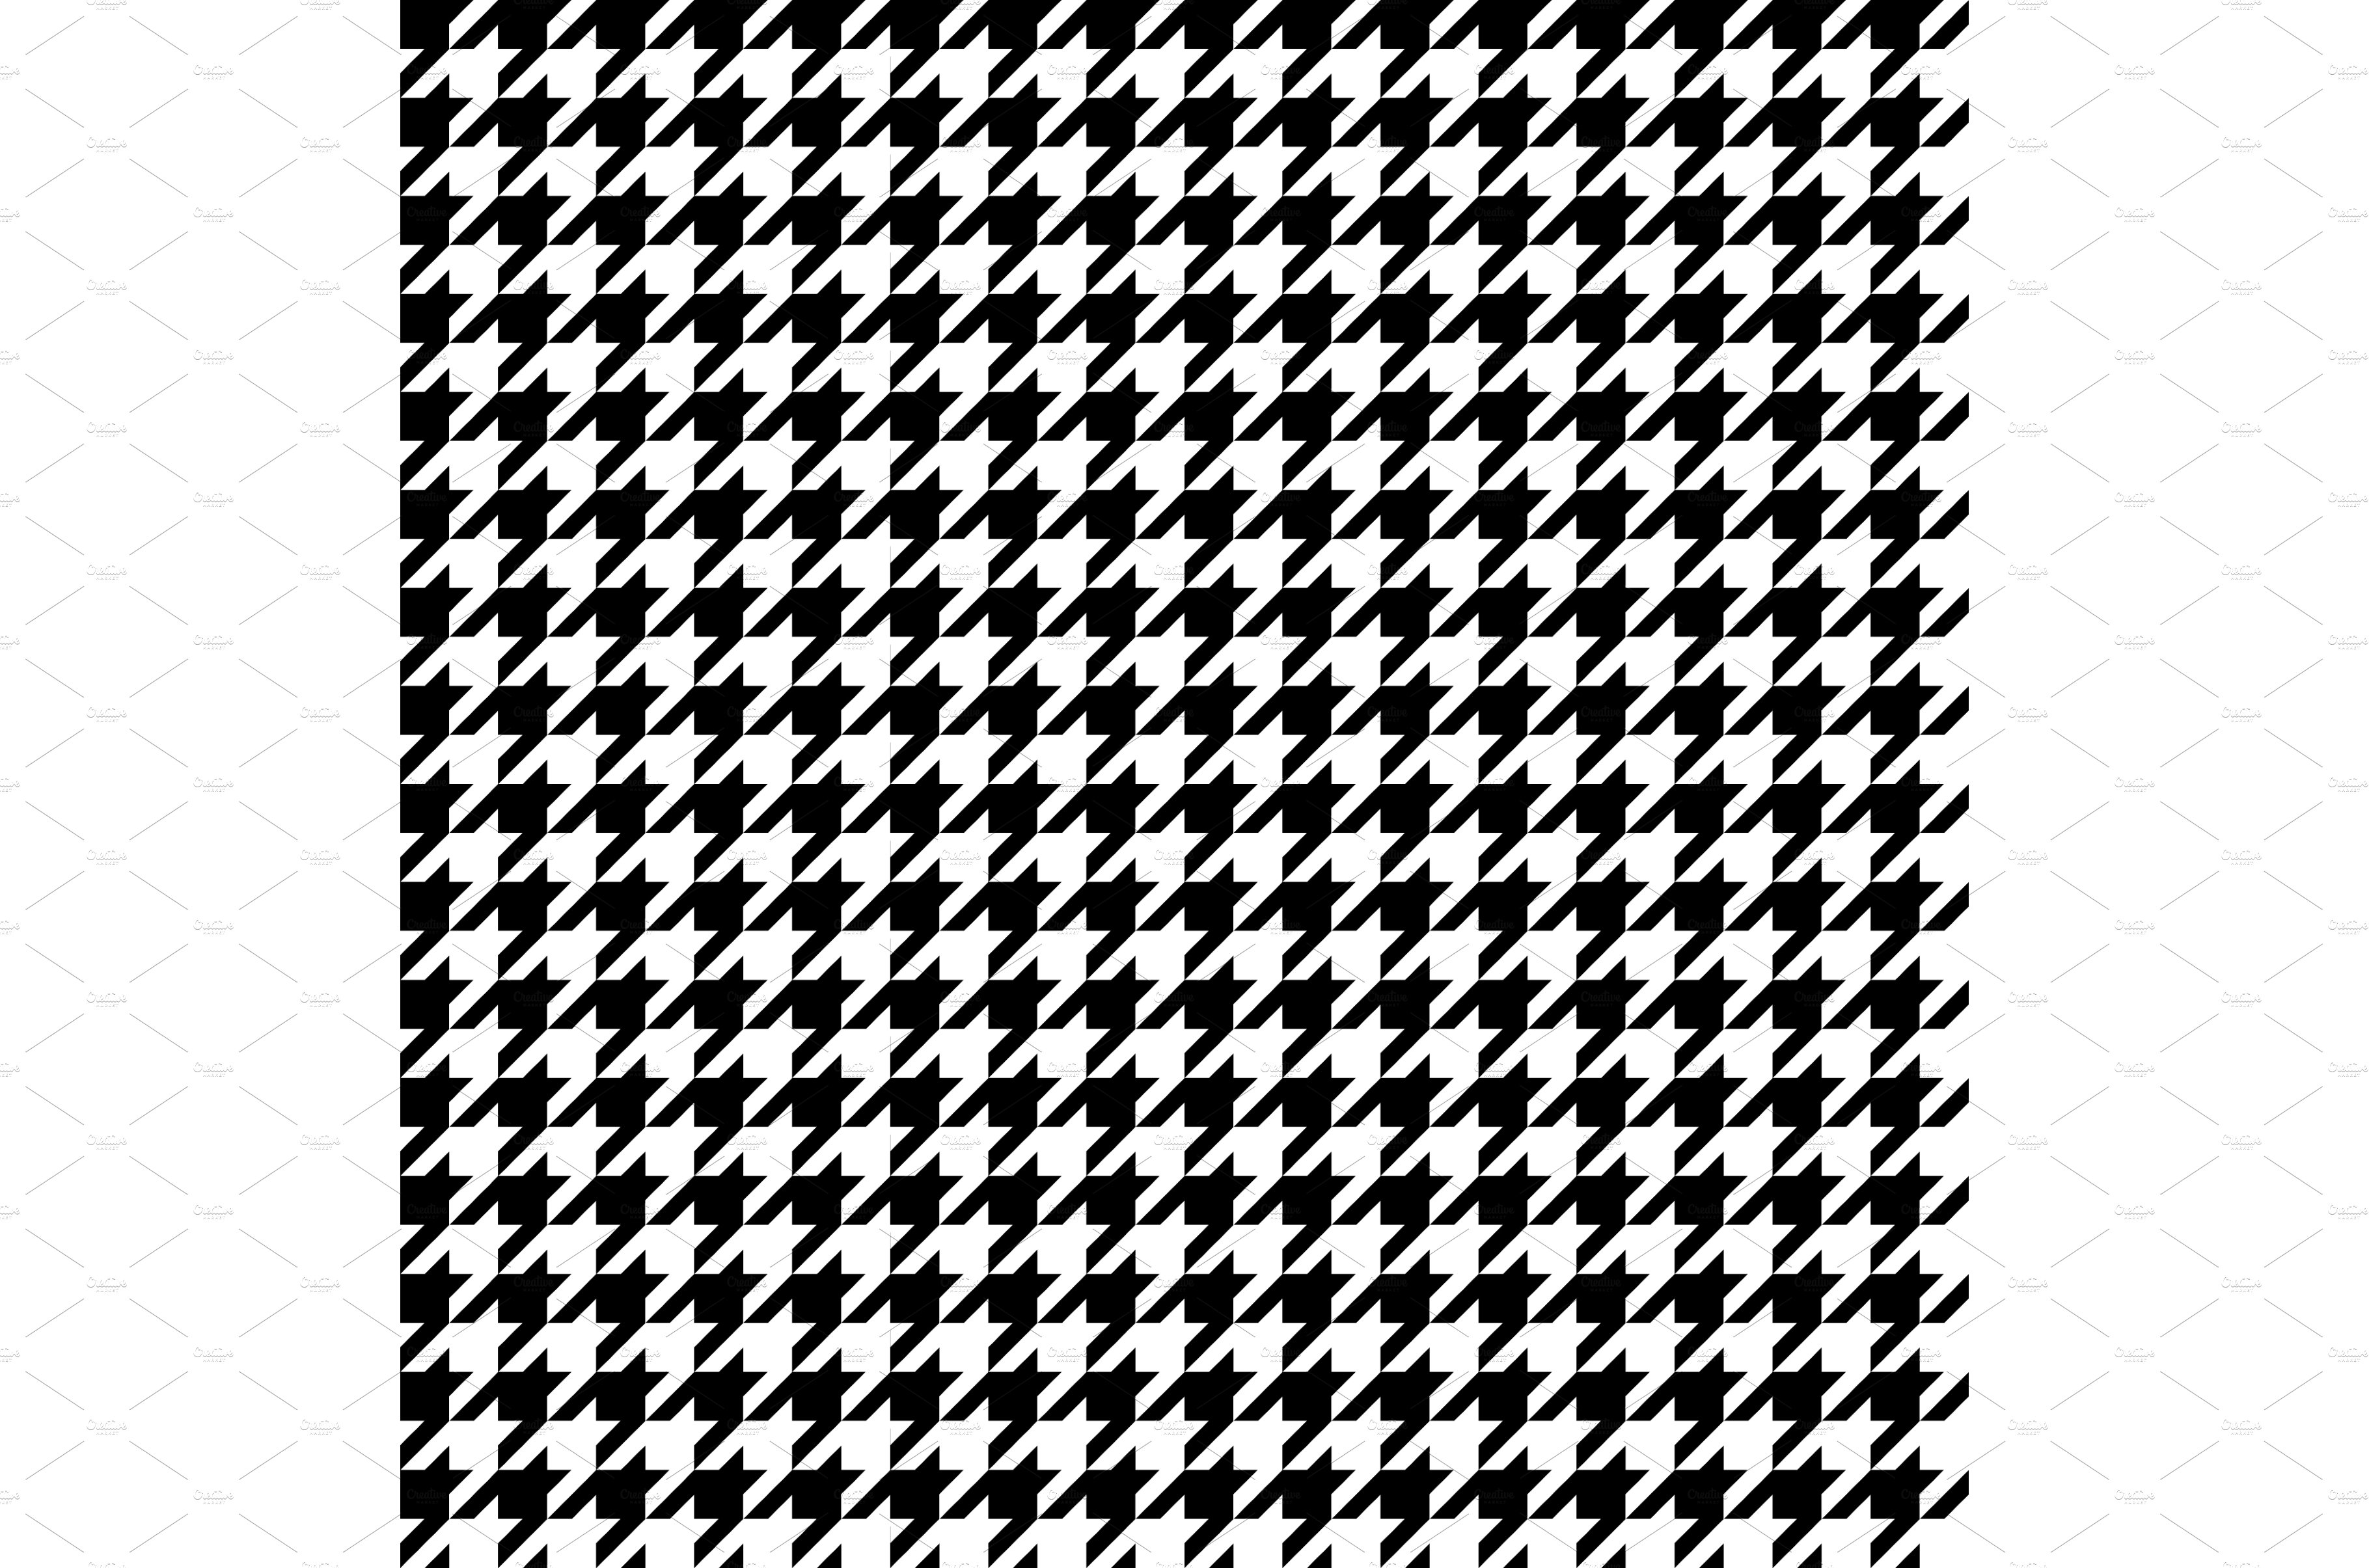 Houndstooth seamless pattern. Fabric cover image.